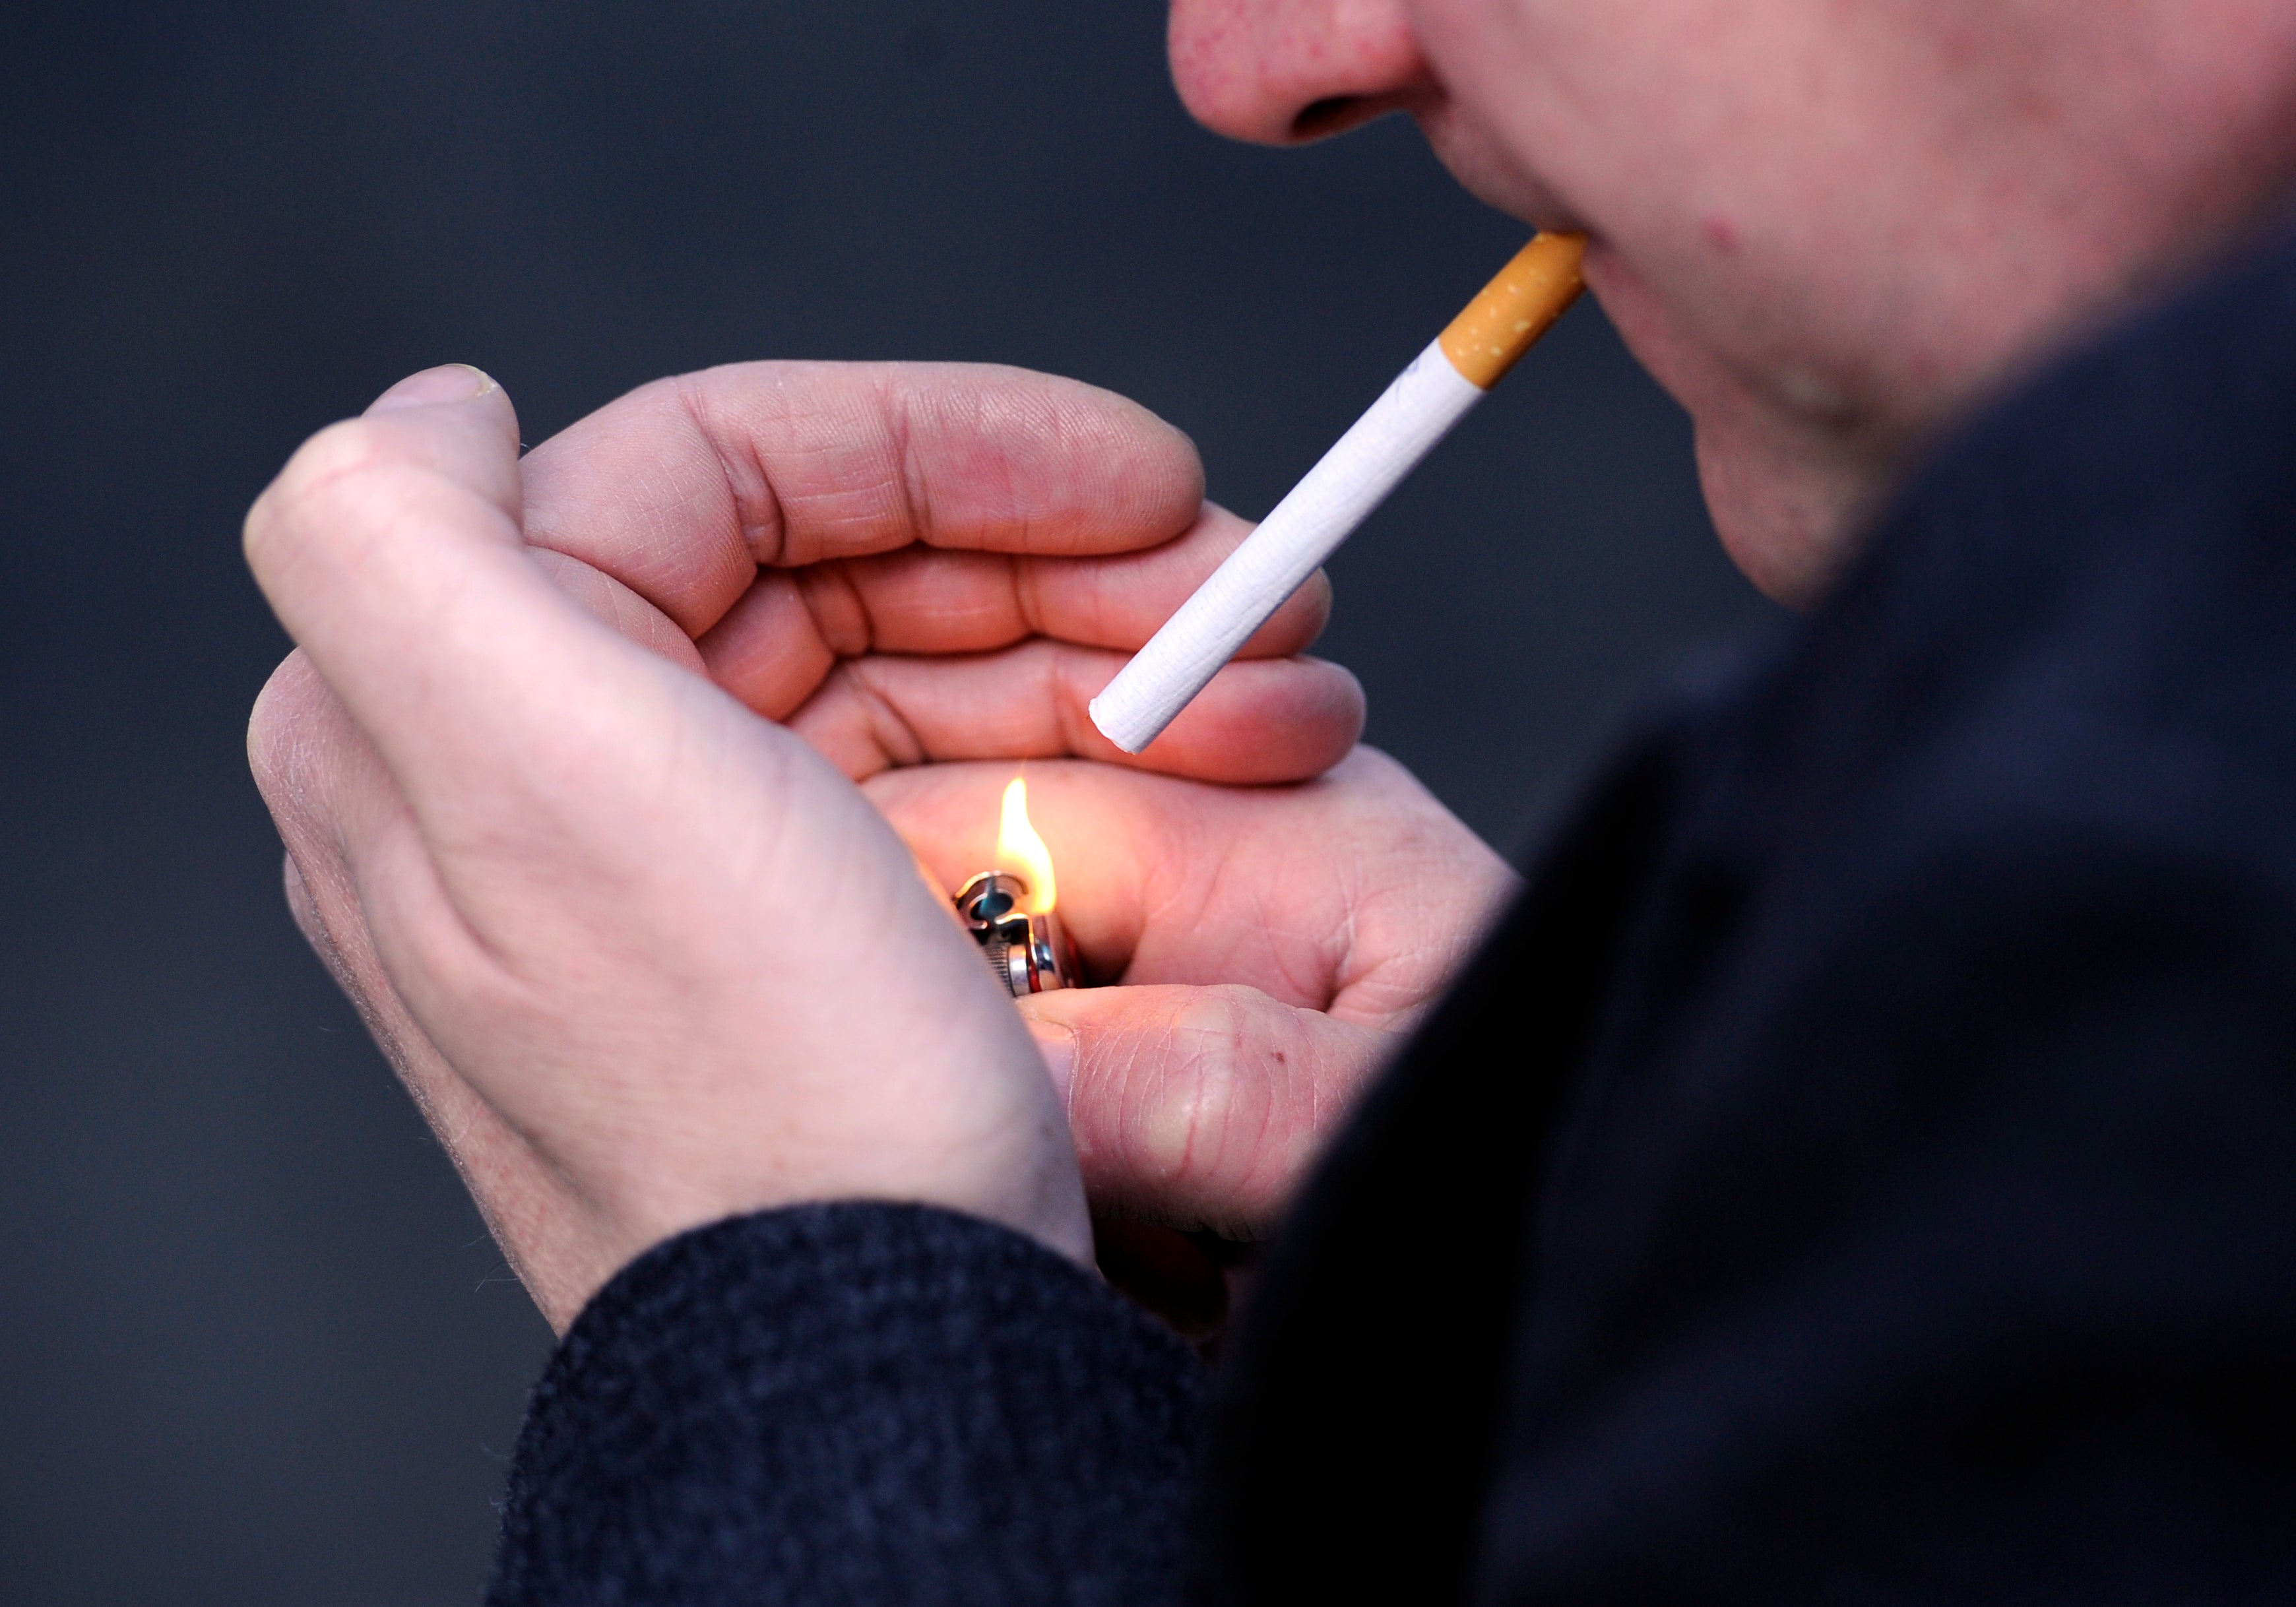 The NHS has released a film where health experts discuss the link between adult smoking and the likelihood of children in their household becoming smokers (PA)